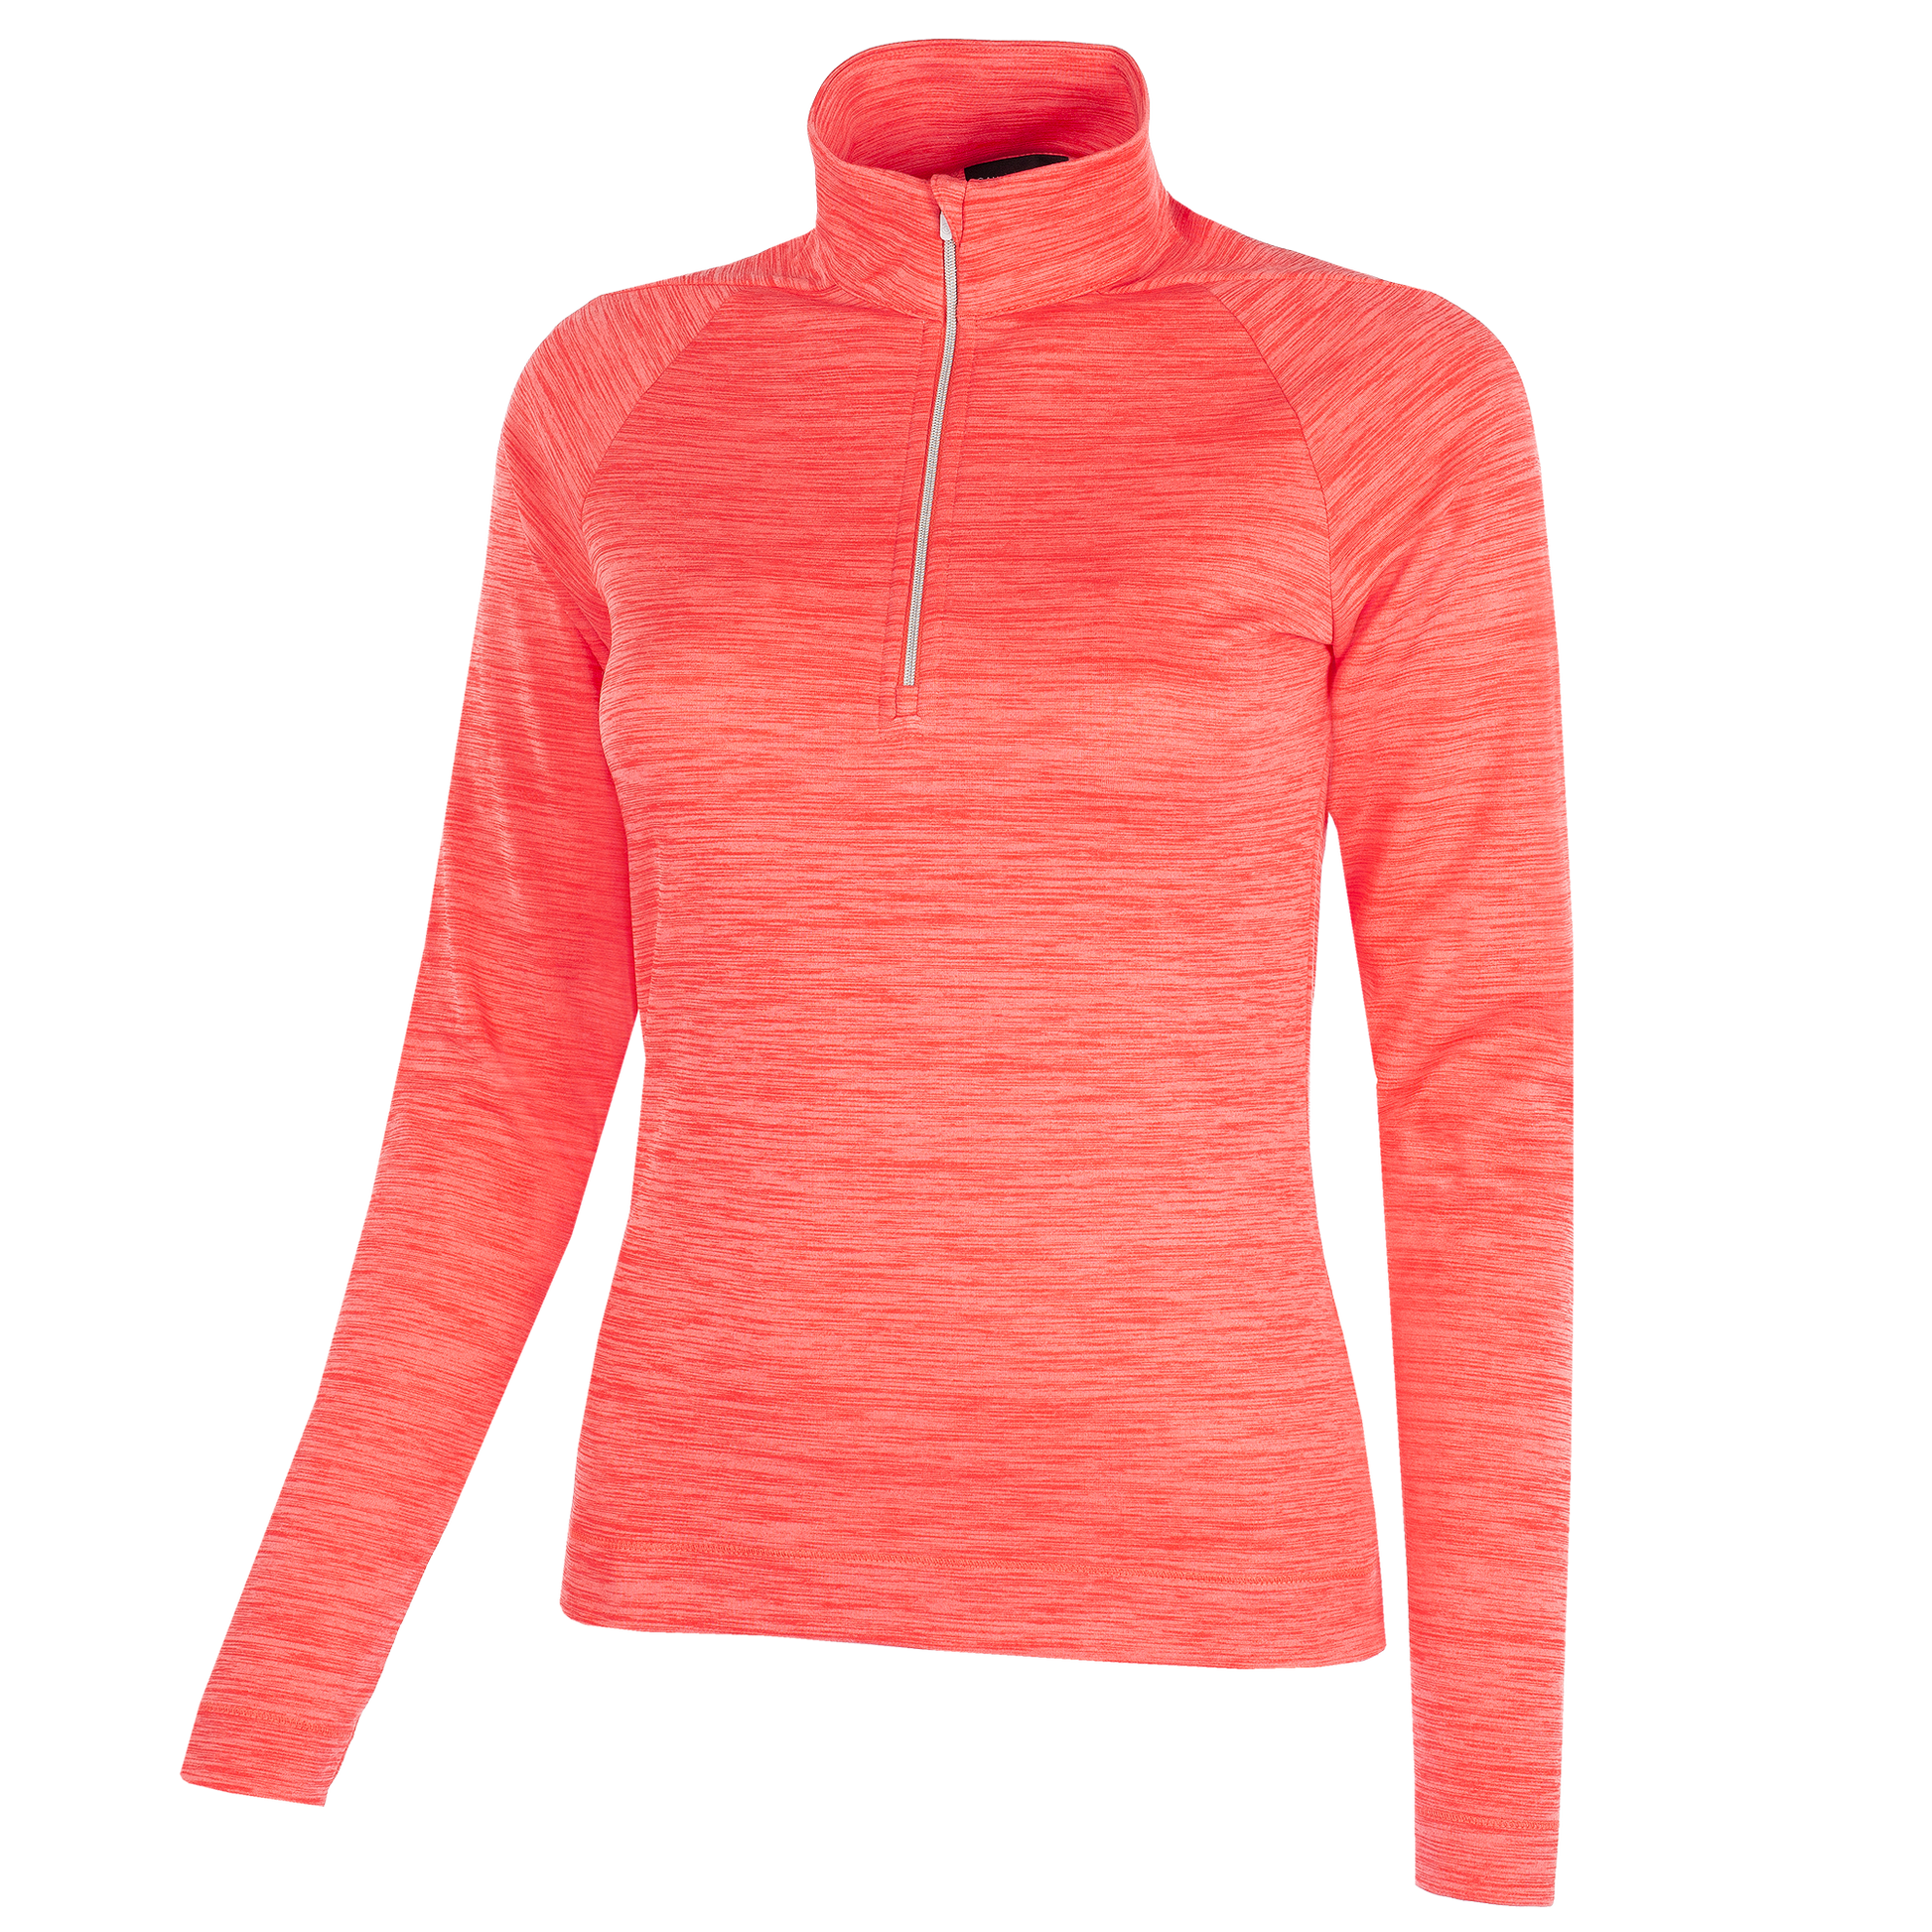 Galvin Green Ladies INSULA Zip Neck Mid-layer Top in Coral